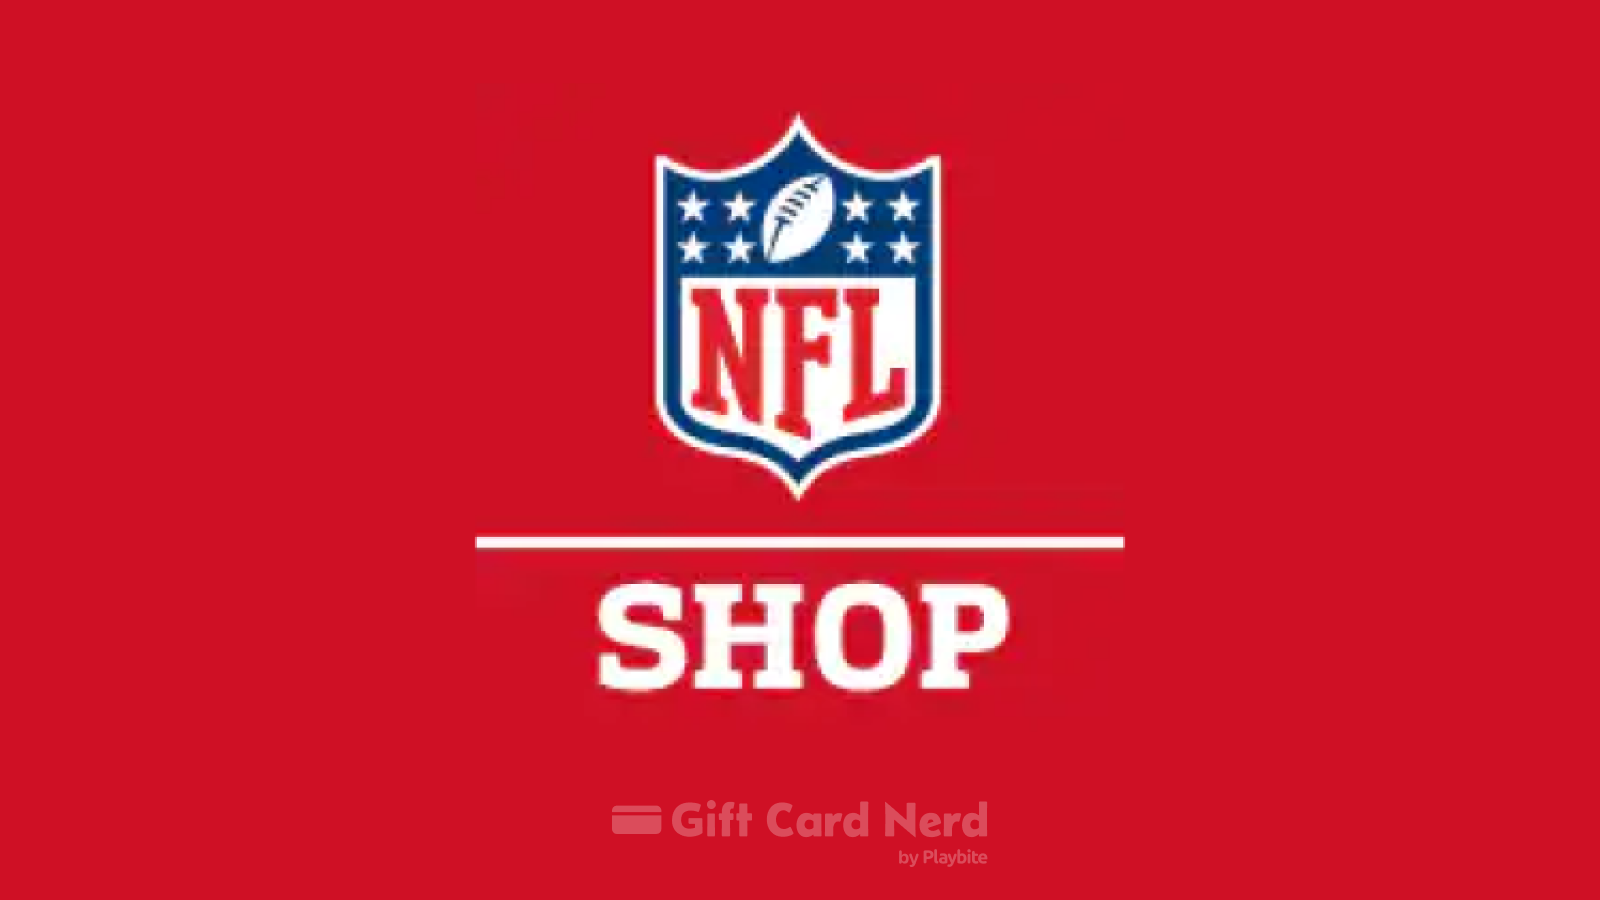 Can I Use an NFL Shop Gift Card on Steam?